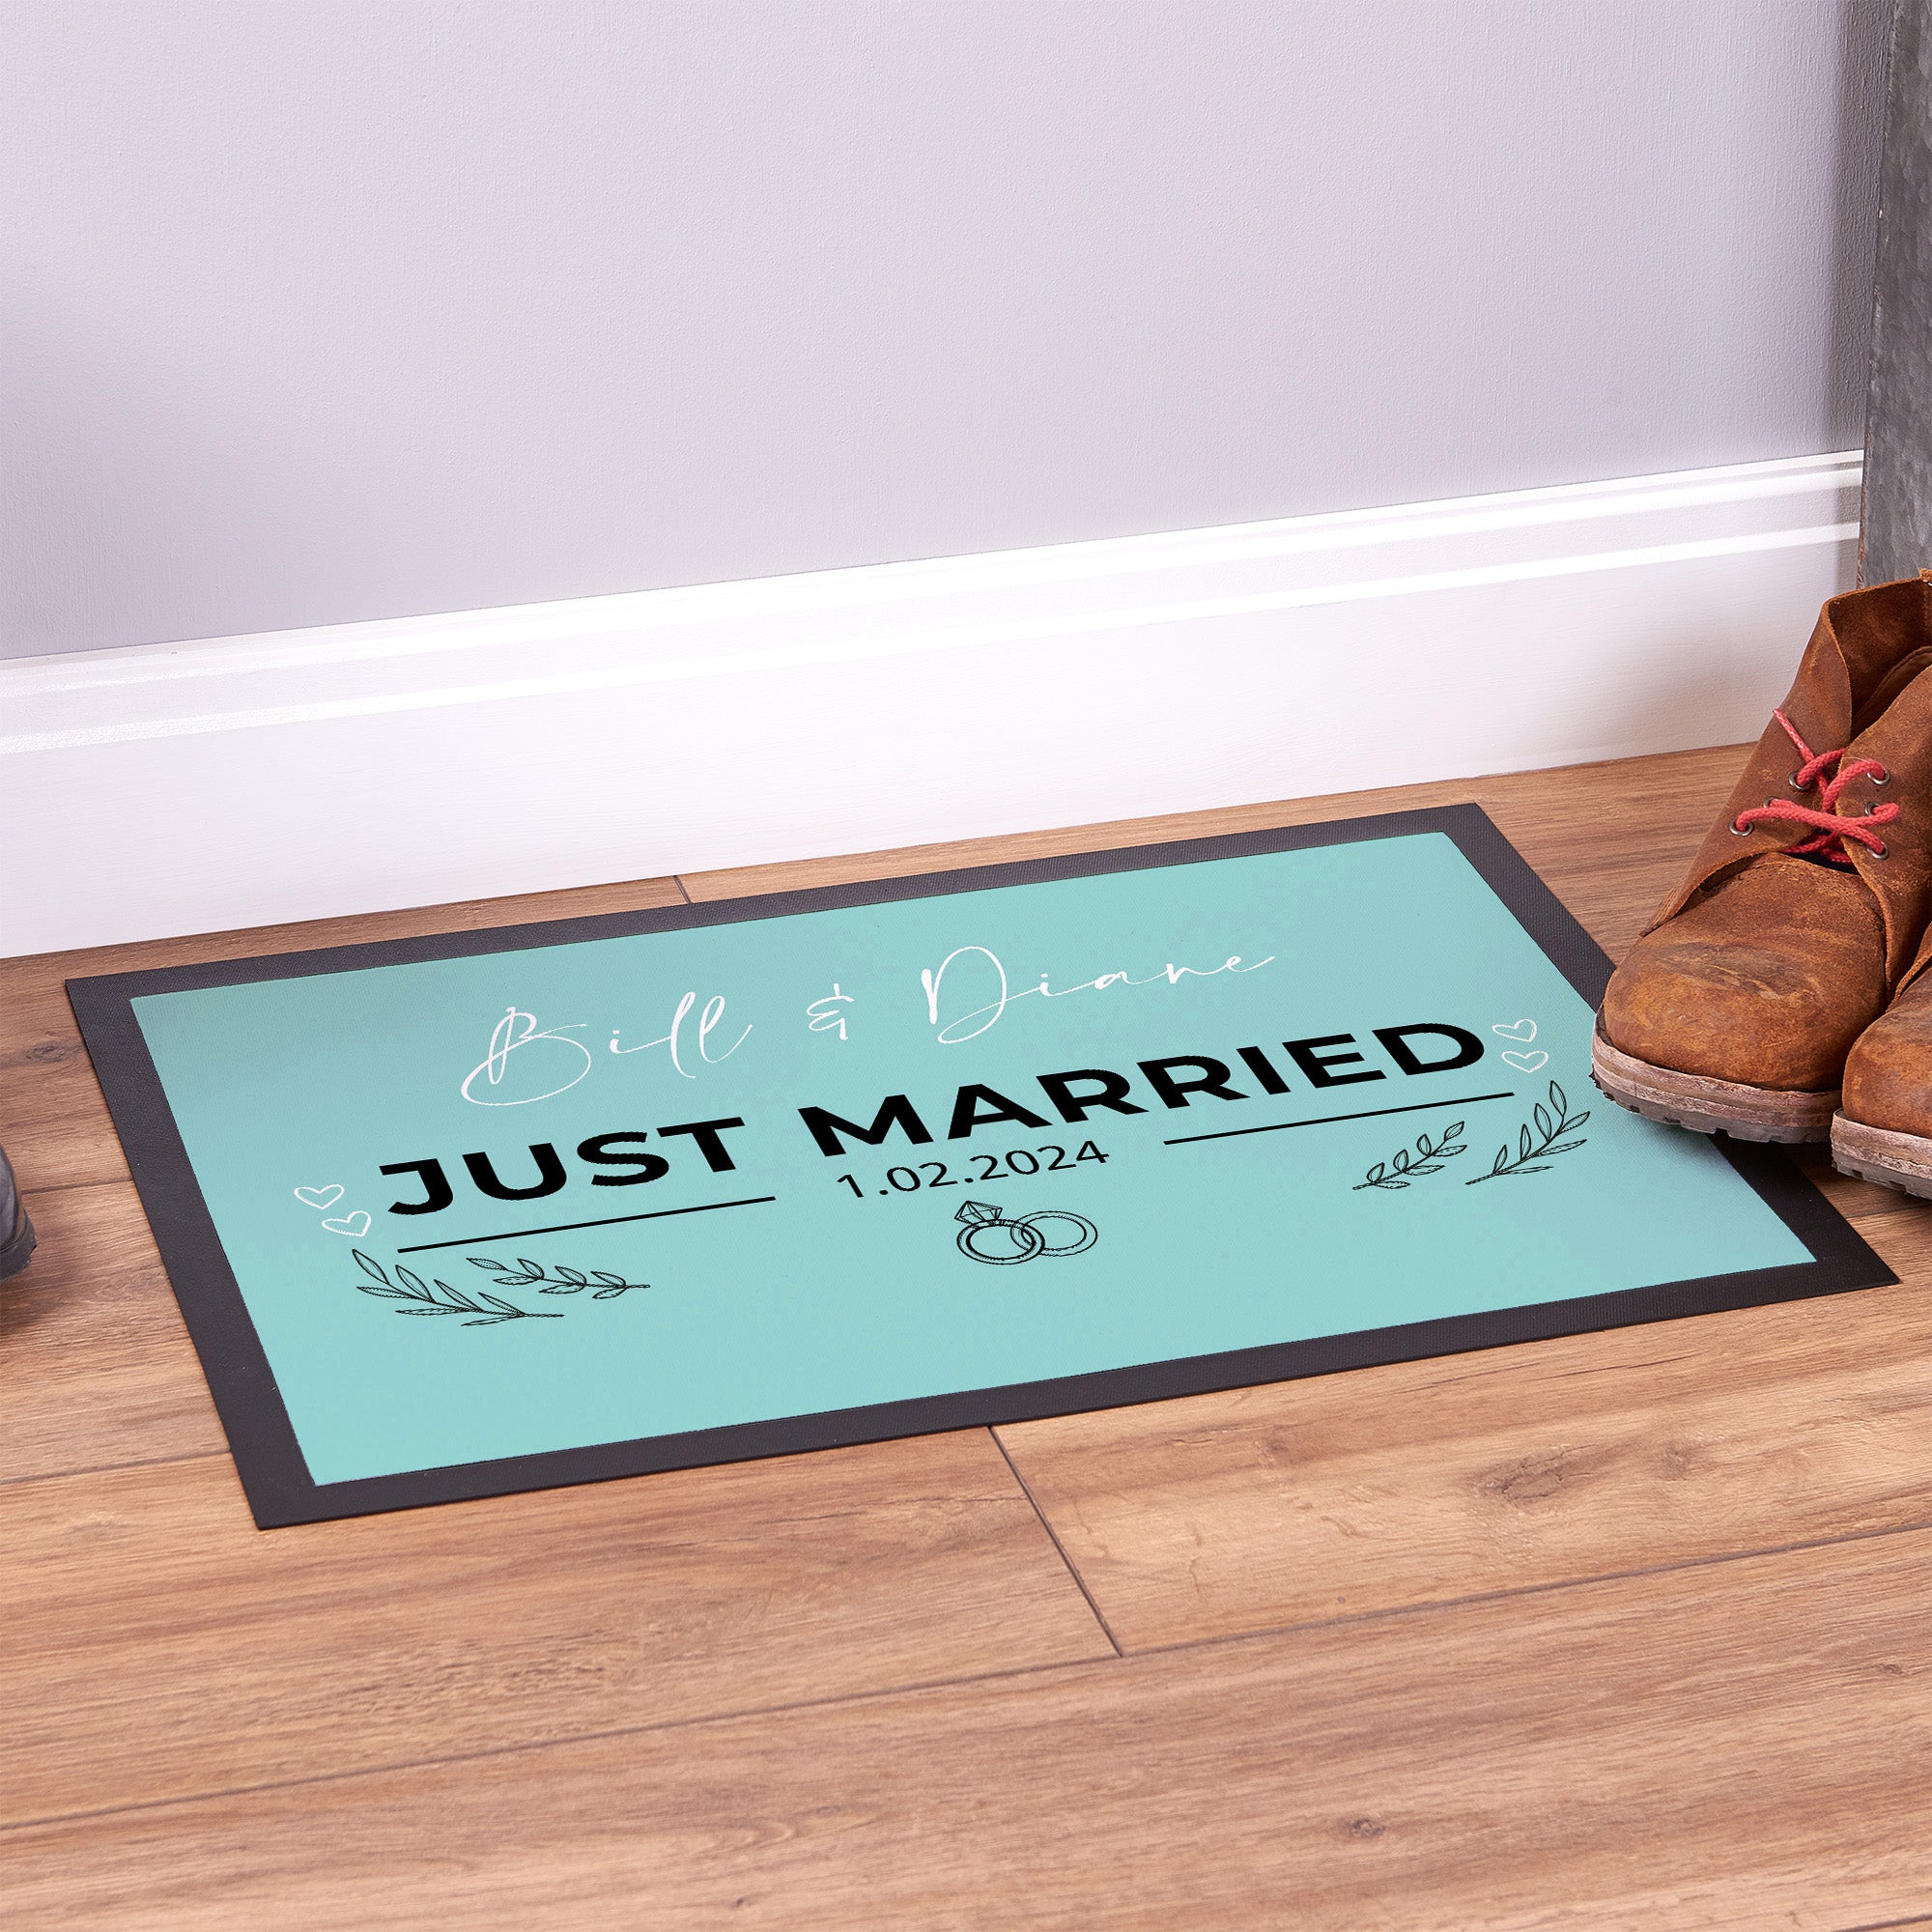 Just Married - Any Colour - Personalised Door Mat - 60cm x 40cm